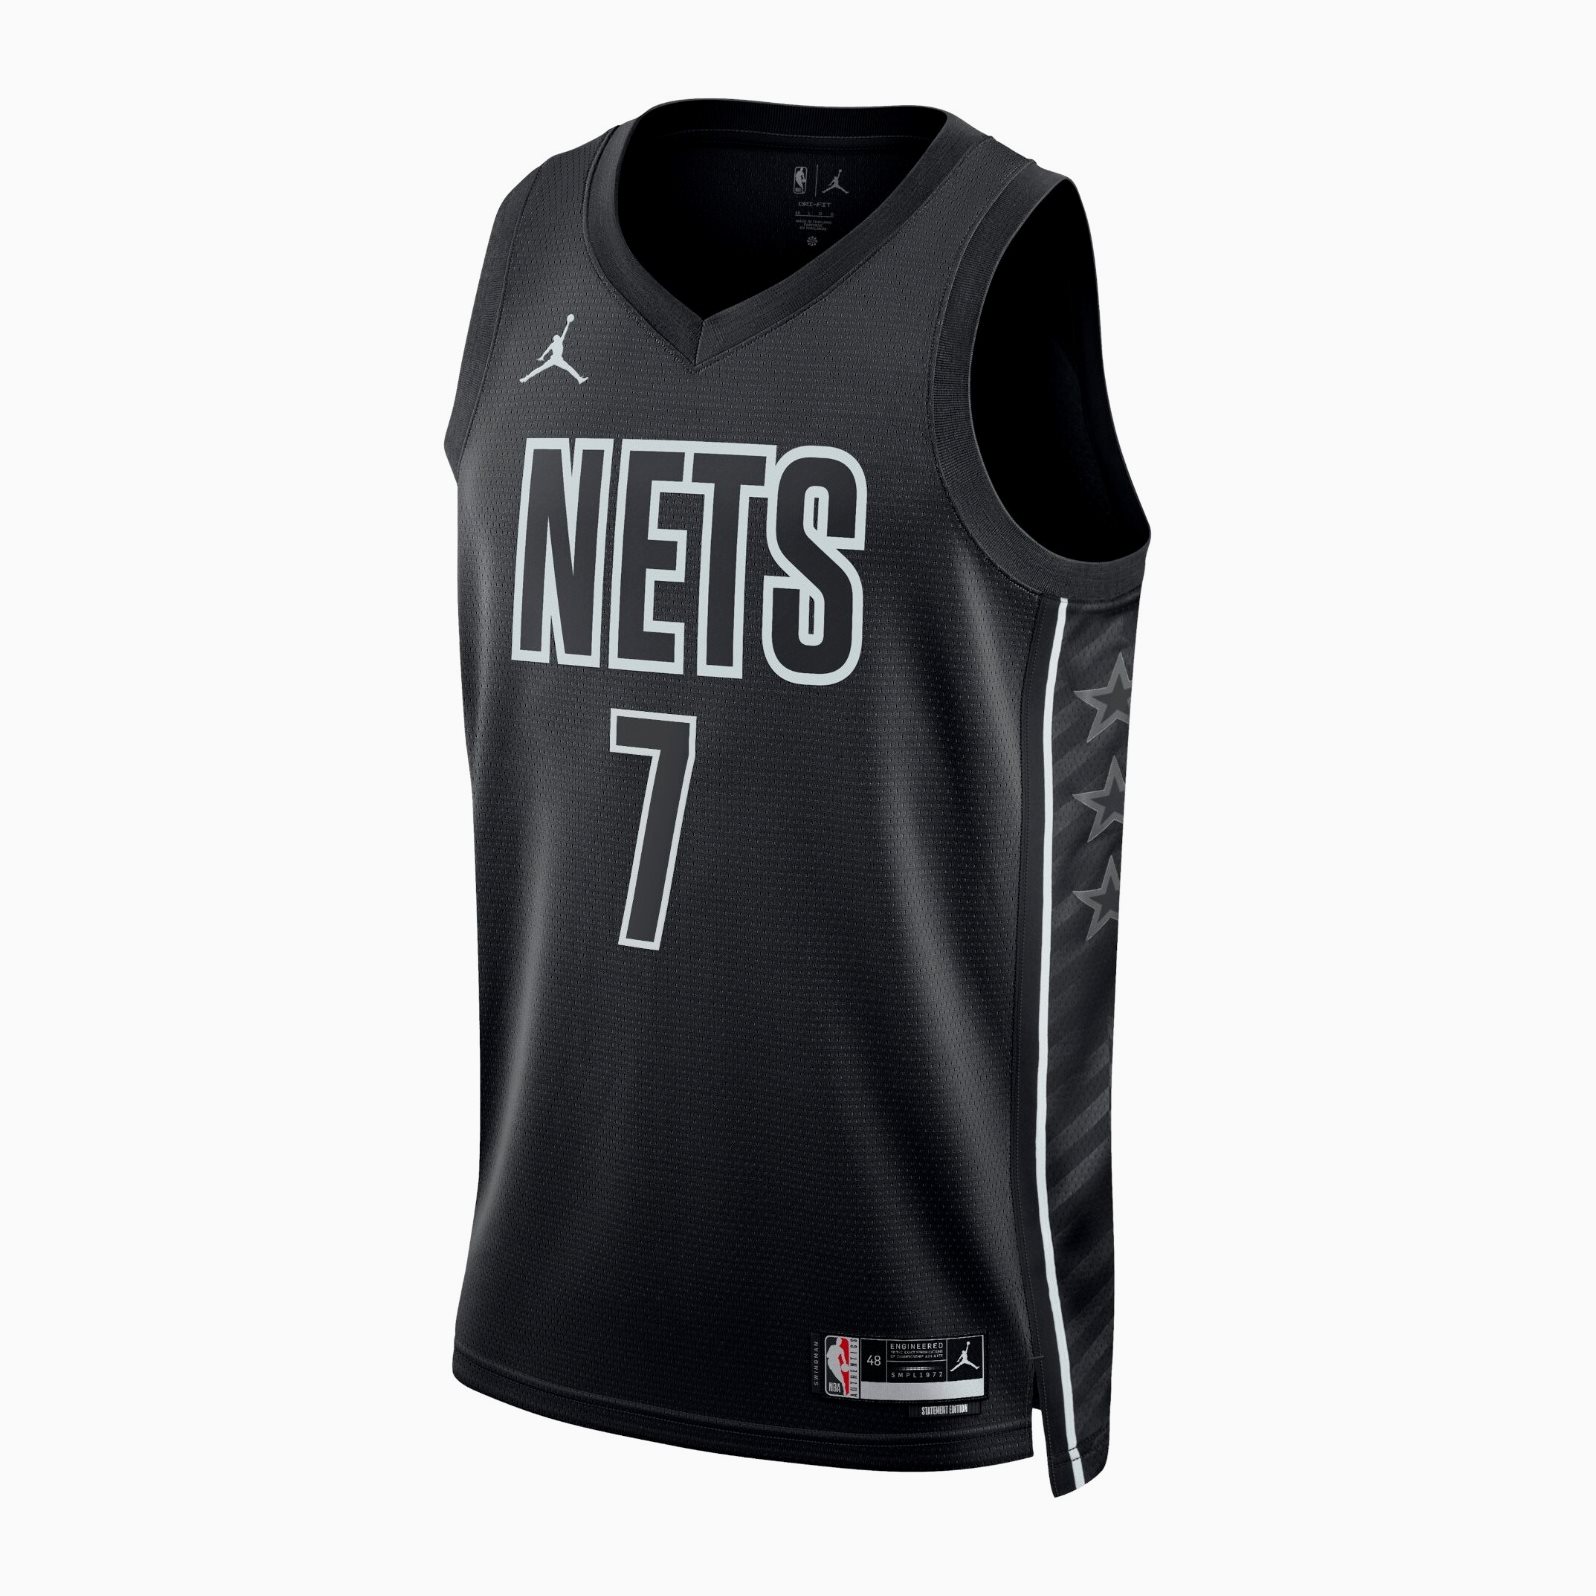 Basketball Forever - LEAKED shot of the Brooklyn Nets Nike jersey